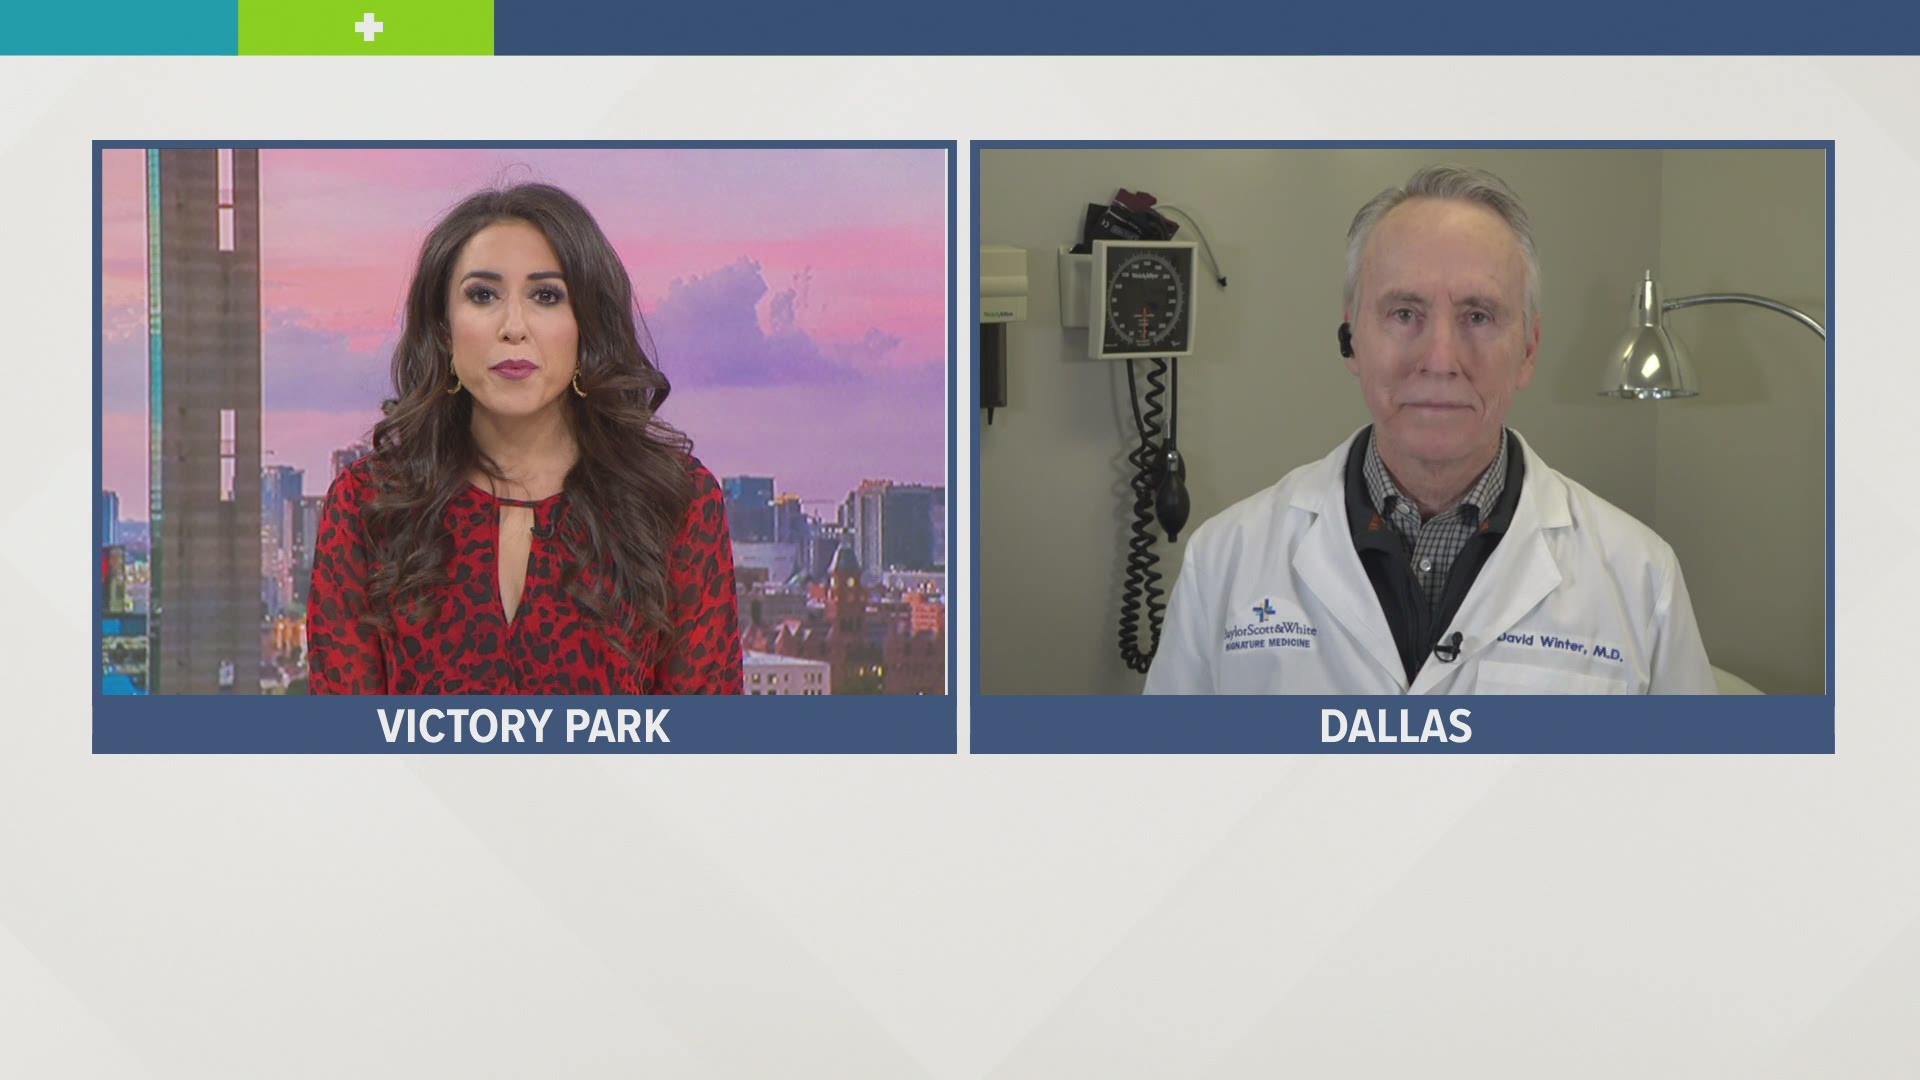 Dr. David Winter from Baylor Scott and White Health answers questions about coronavirus symptoms and what is safe to do when it comes to the COVID-19 vaccine.